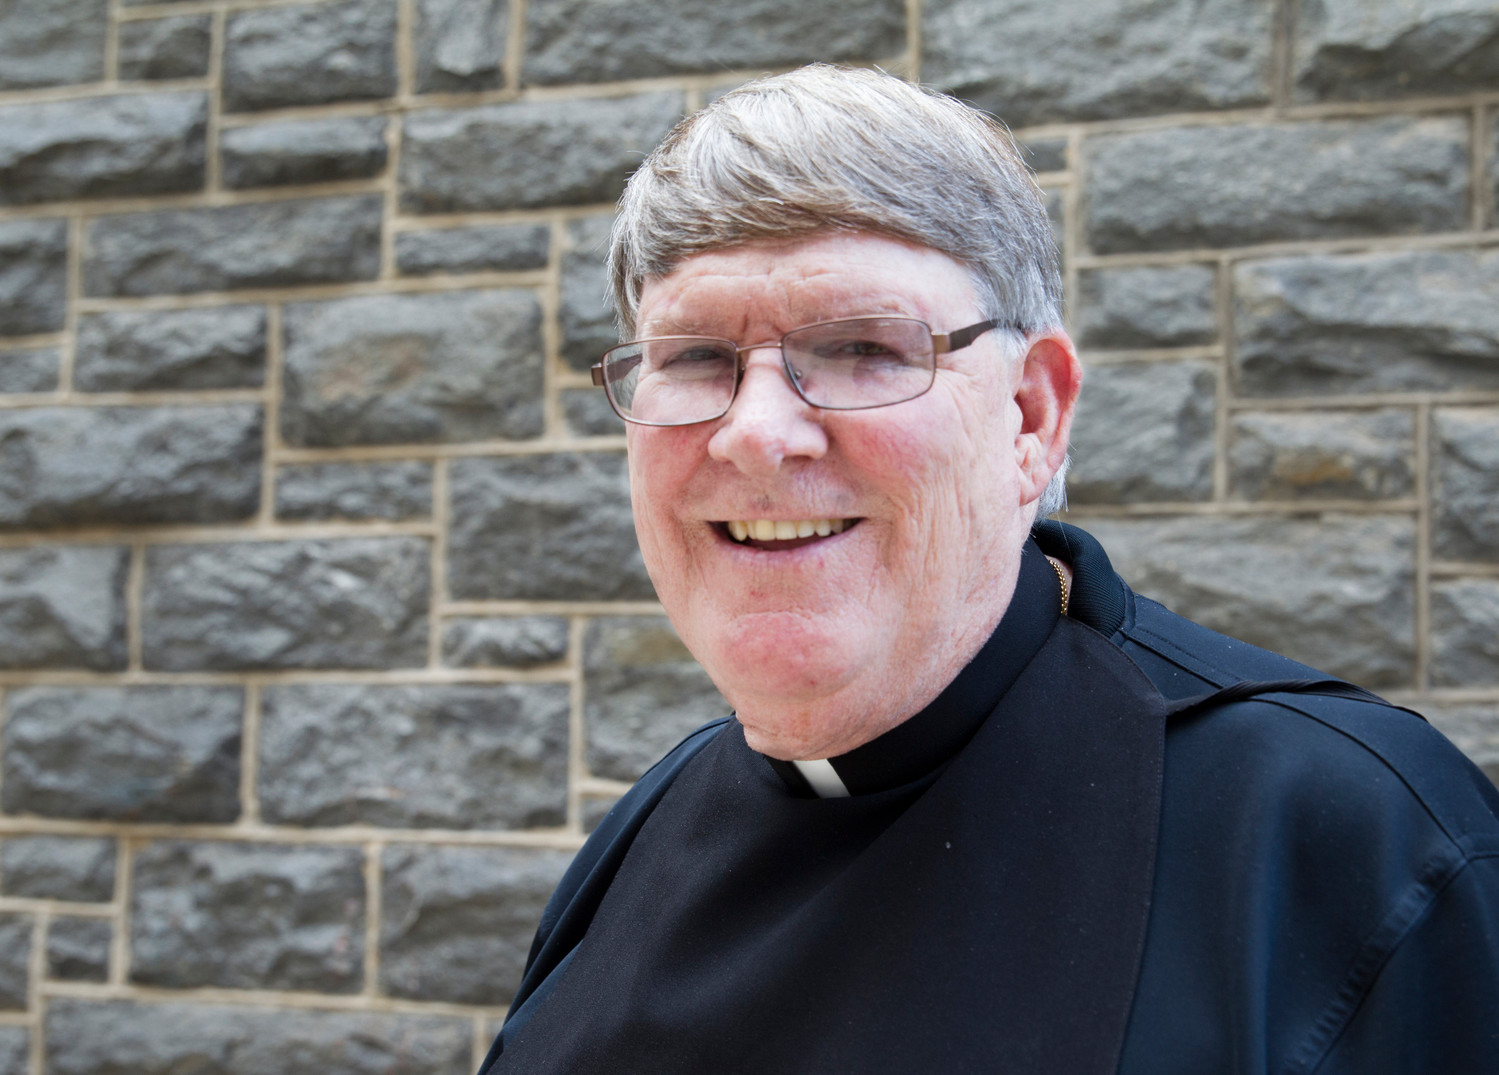 Monsignor John Enzler, president and CEO of Catholic Charities of the Archdiocese of Washington, is pictured in a 2015 photo. Msgr. Enzler is the former pastor of Brett Kavanaugh, a judge on the U.S. Court of Appeals for the District of Columbia Circuit, who is President Donald Trump’s nominee for the U.S. Supreme Court.